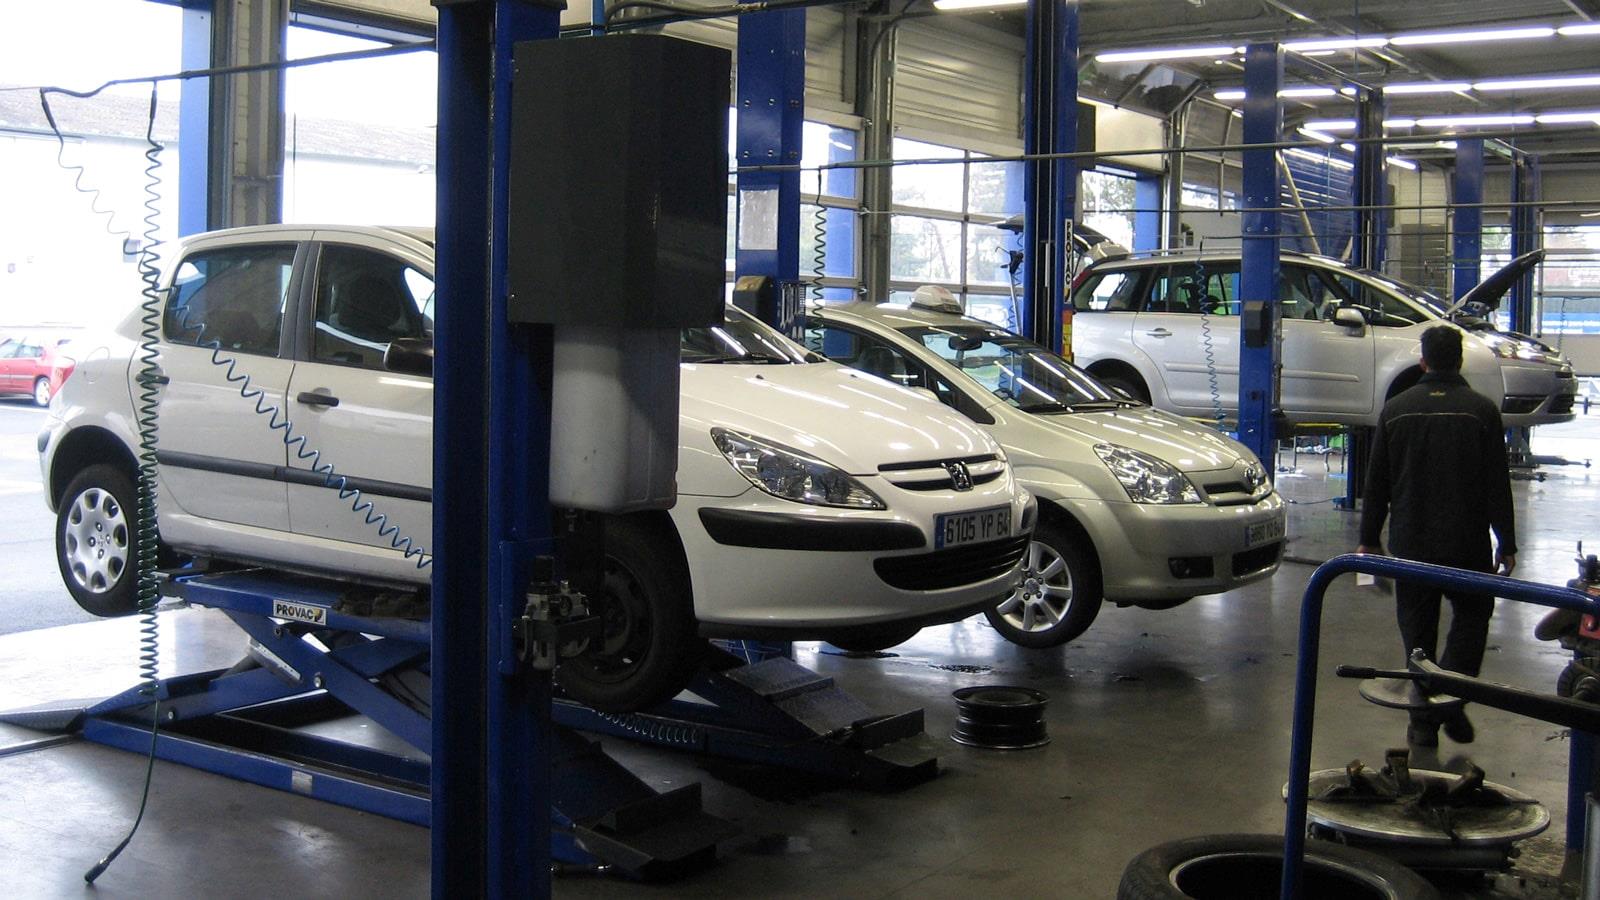 Cars hoisted up for inspection by Norauto mechanics 